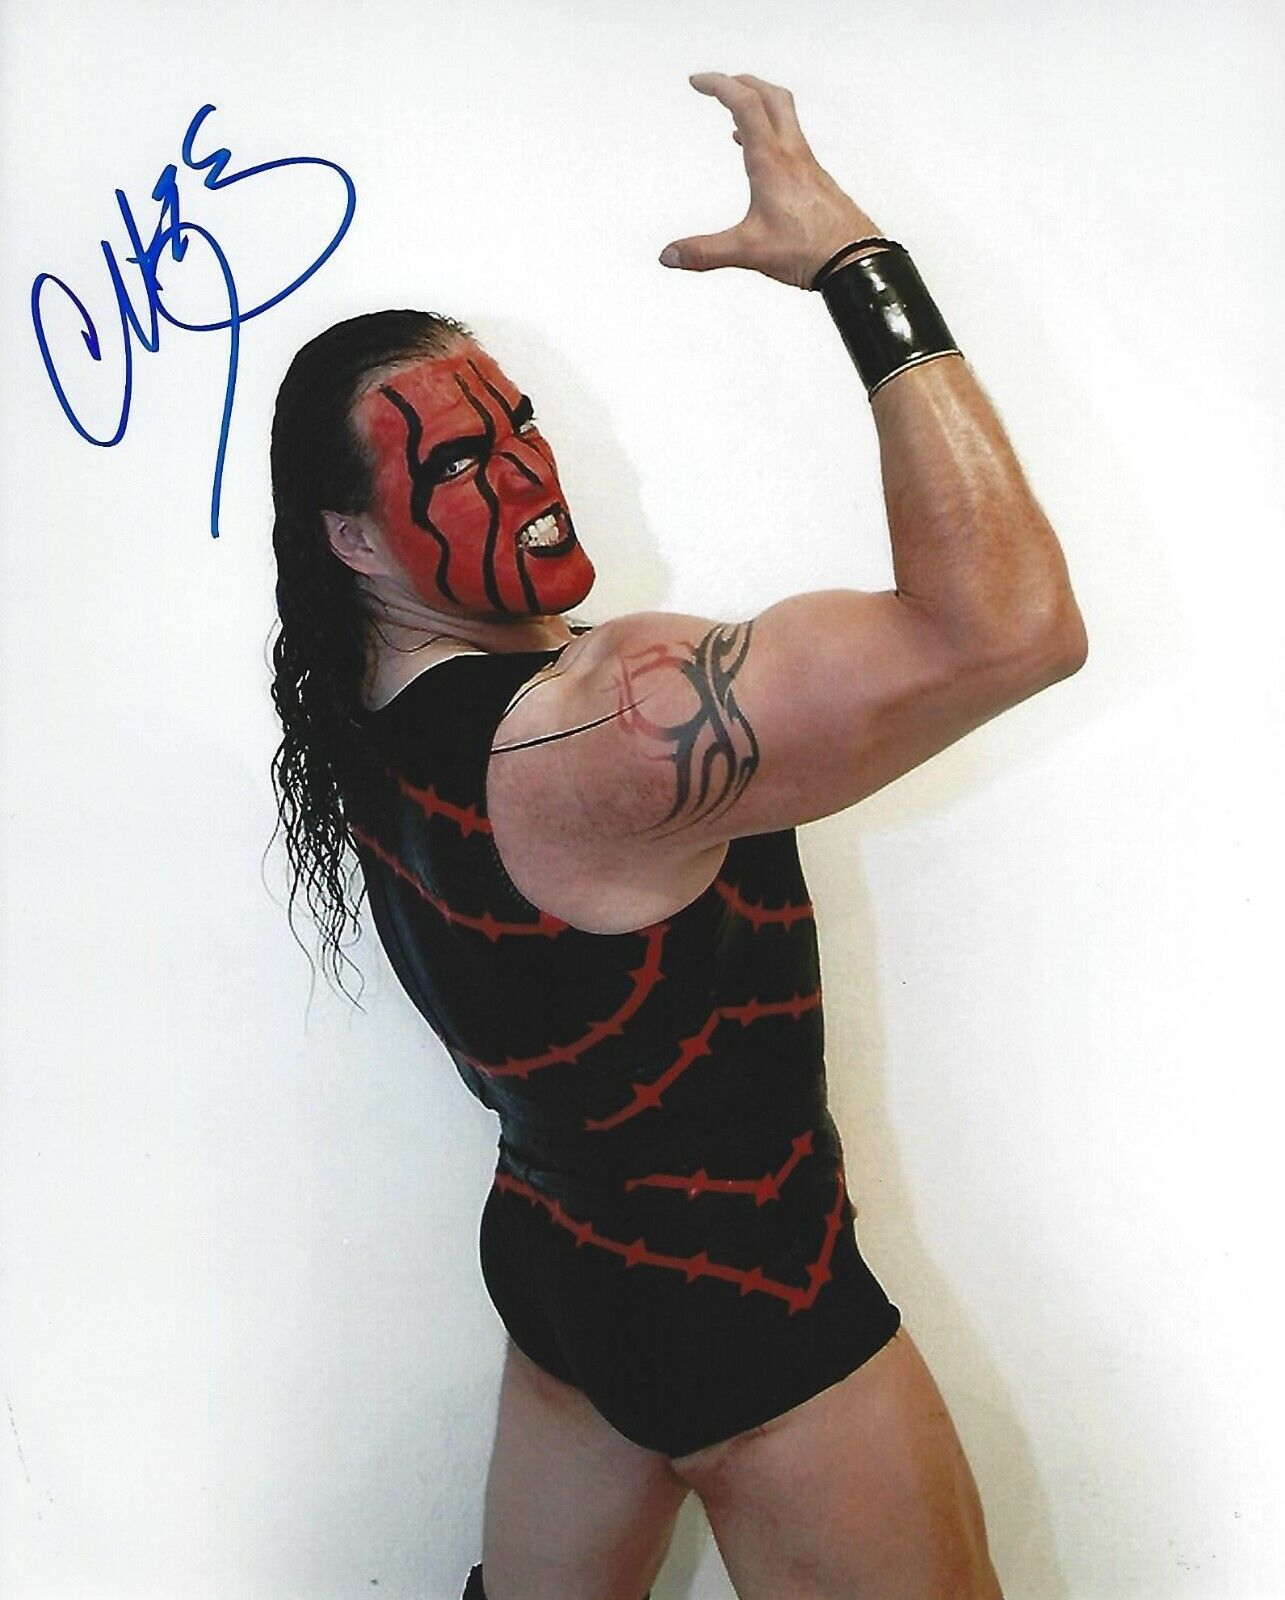 Chessman Signed 8x10 Photo Poster painting AAA Lucha Libre Pro Wrestling Picture Autograph OGTs